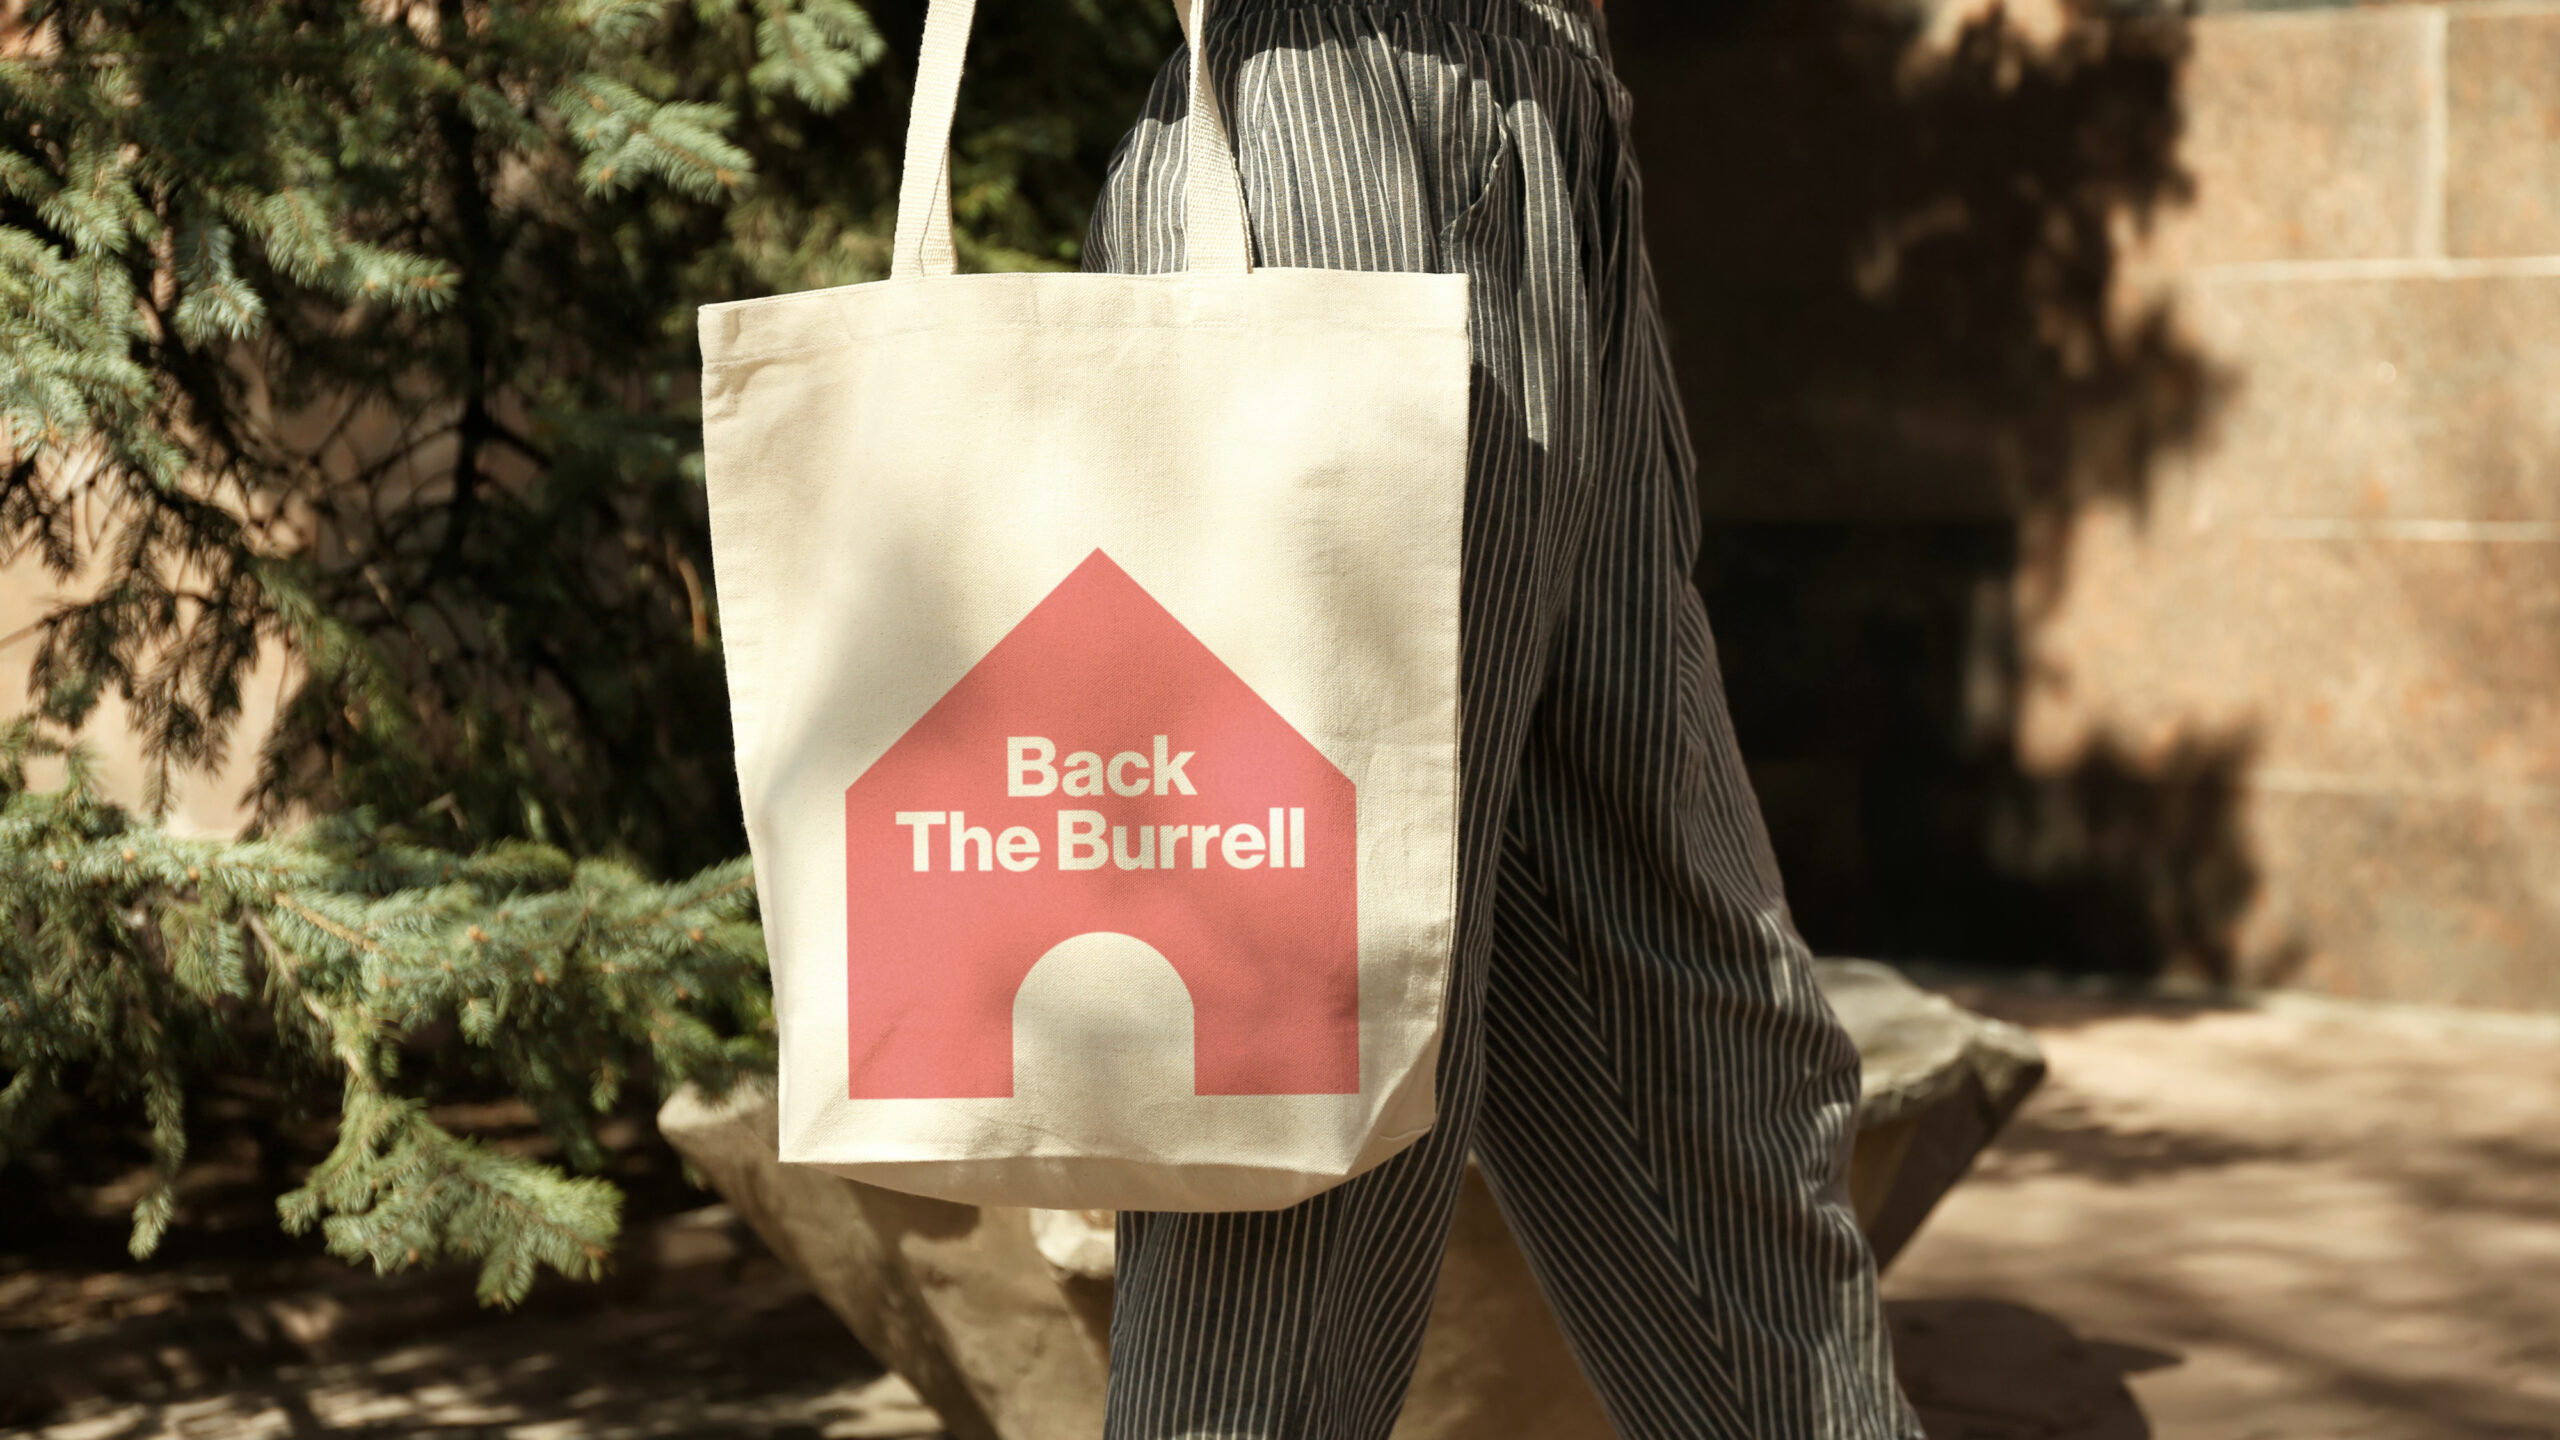 Back The Burrell